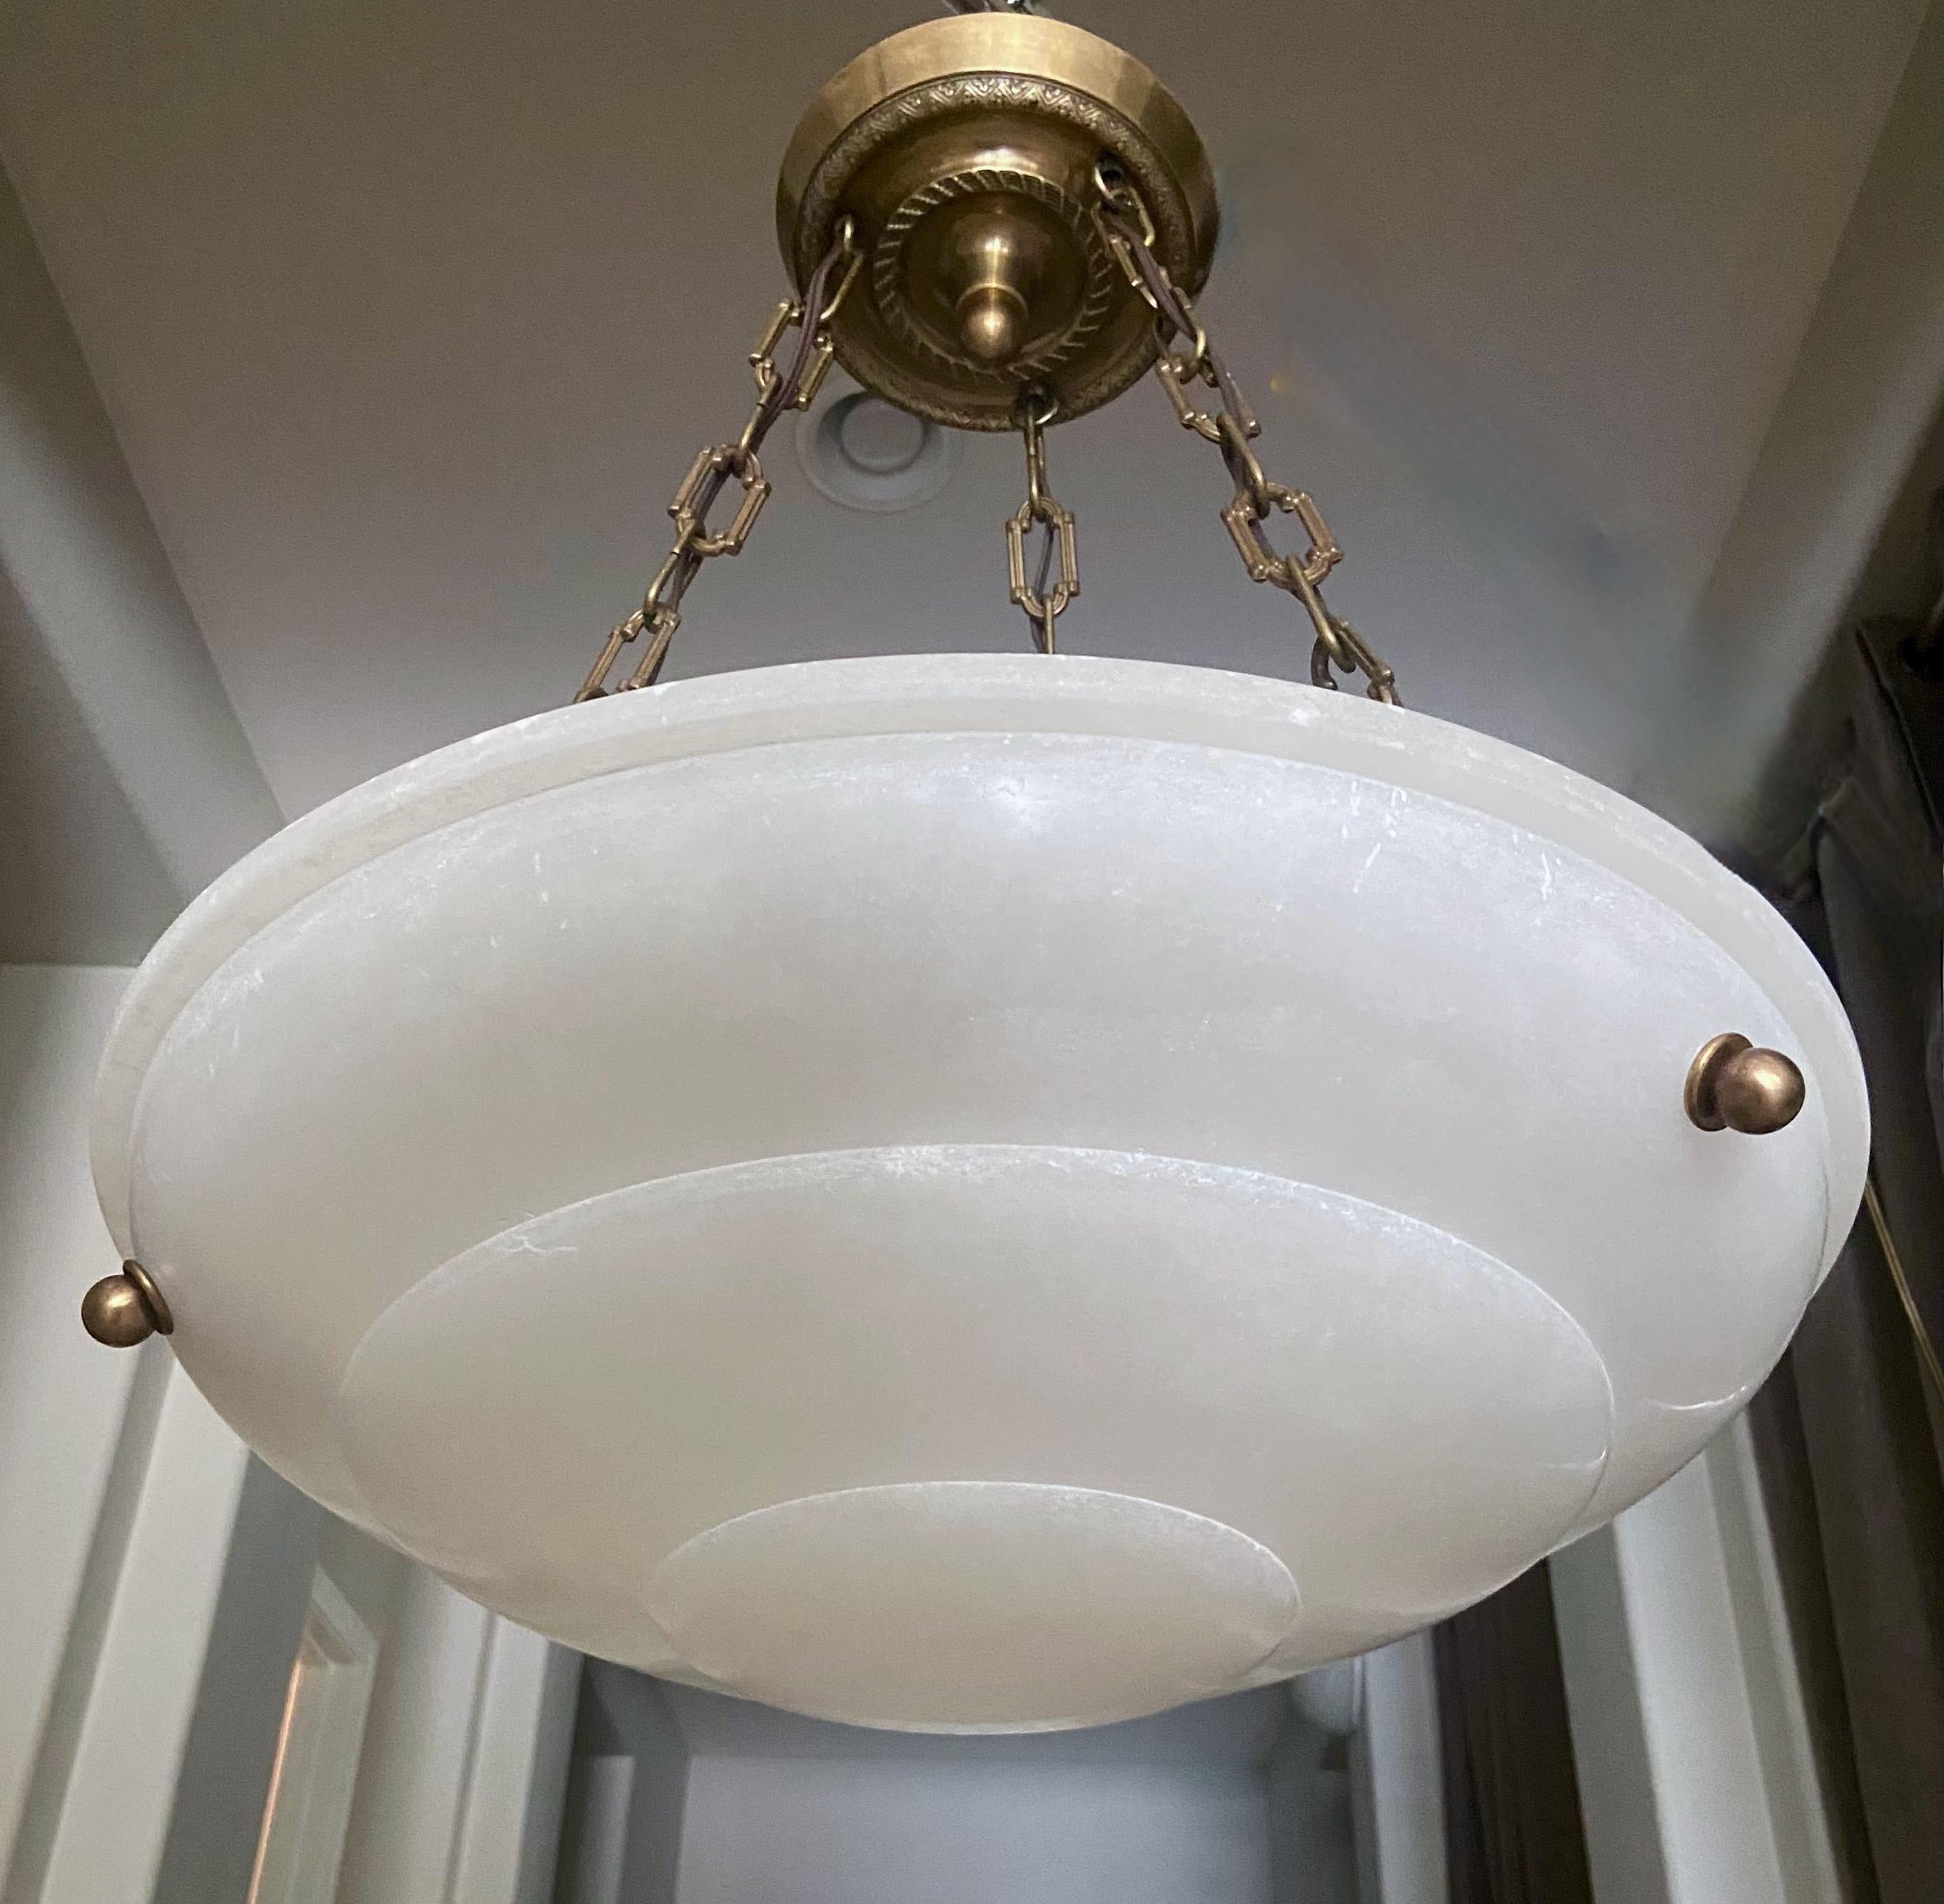 White alabaster pendant light or chandelier with aged patinated brass fittings in the Directoire style. Newly wired for US, fixture uses three candelabra size bulbs

Measures: Alabaster is 18.75